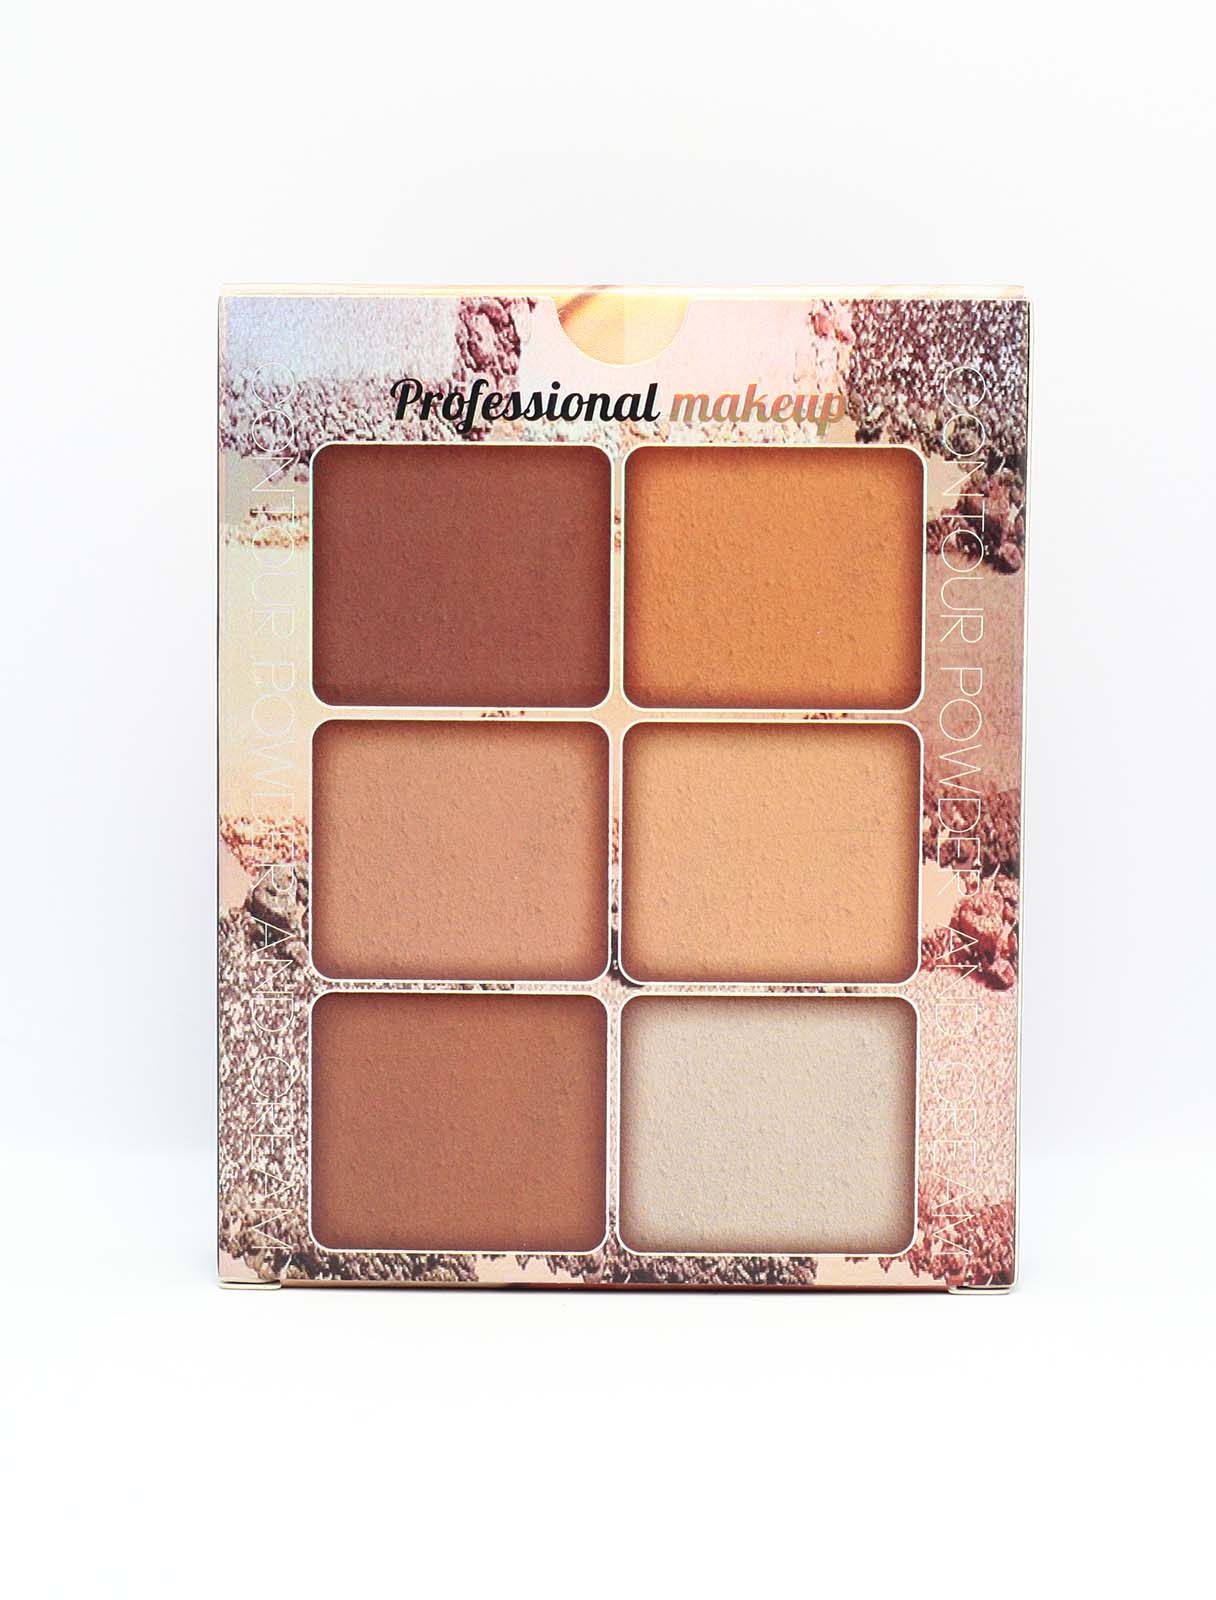 Cream and powder contour palette from Might Cinema